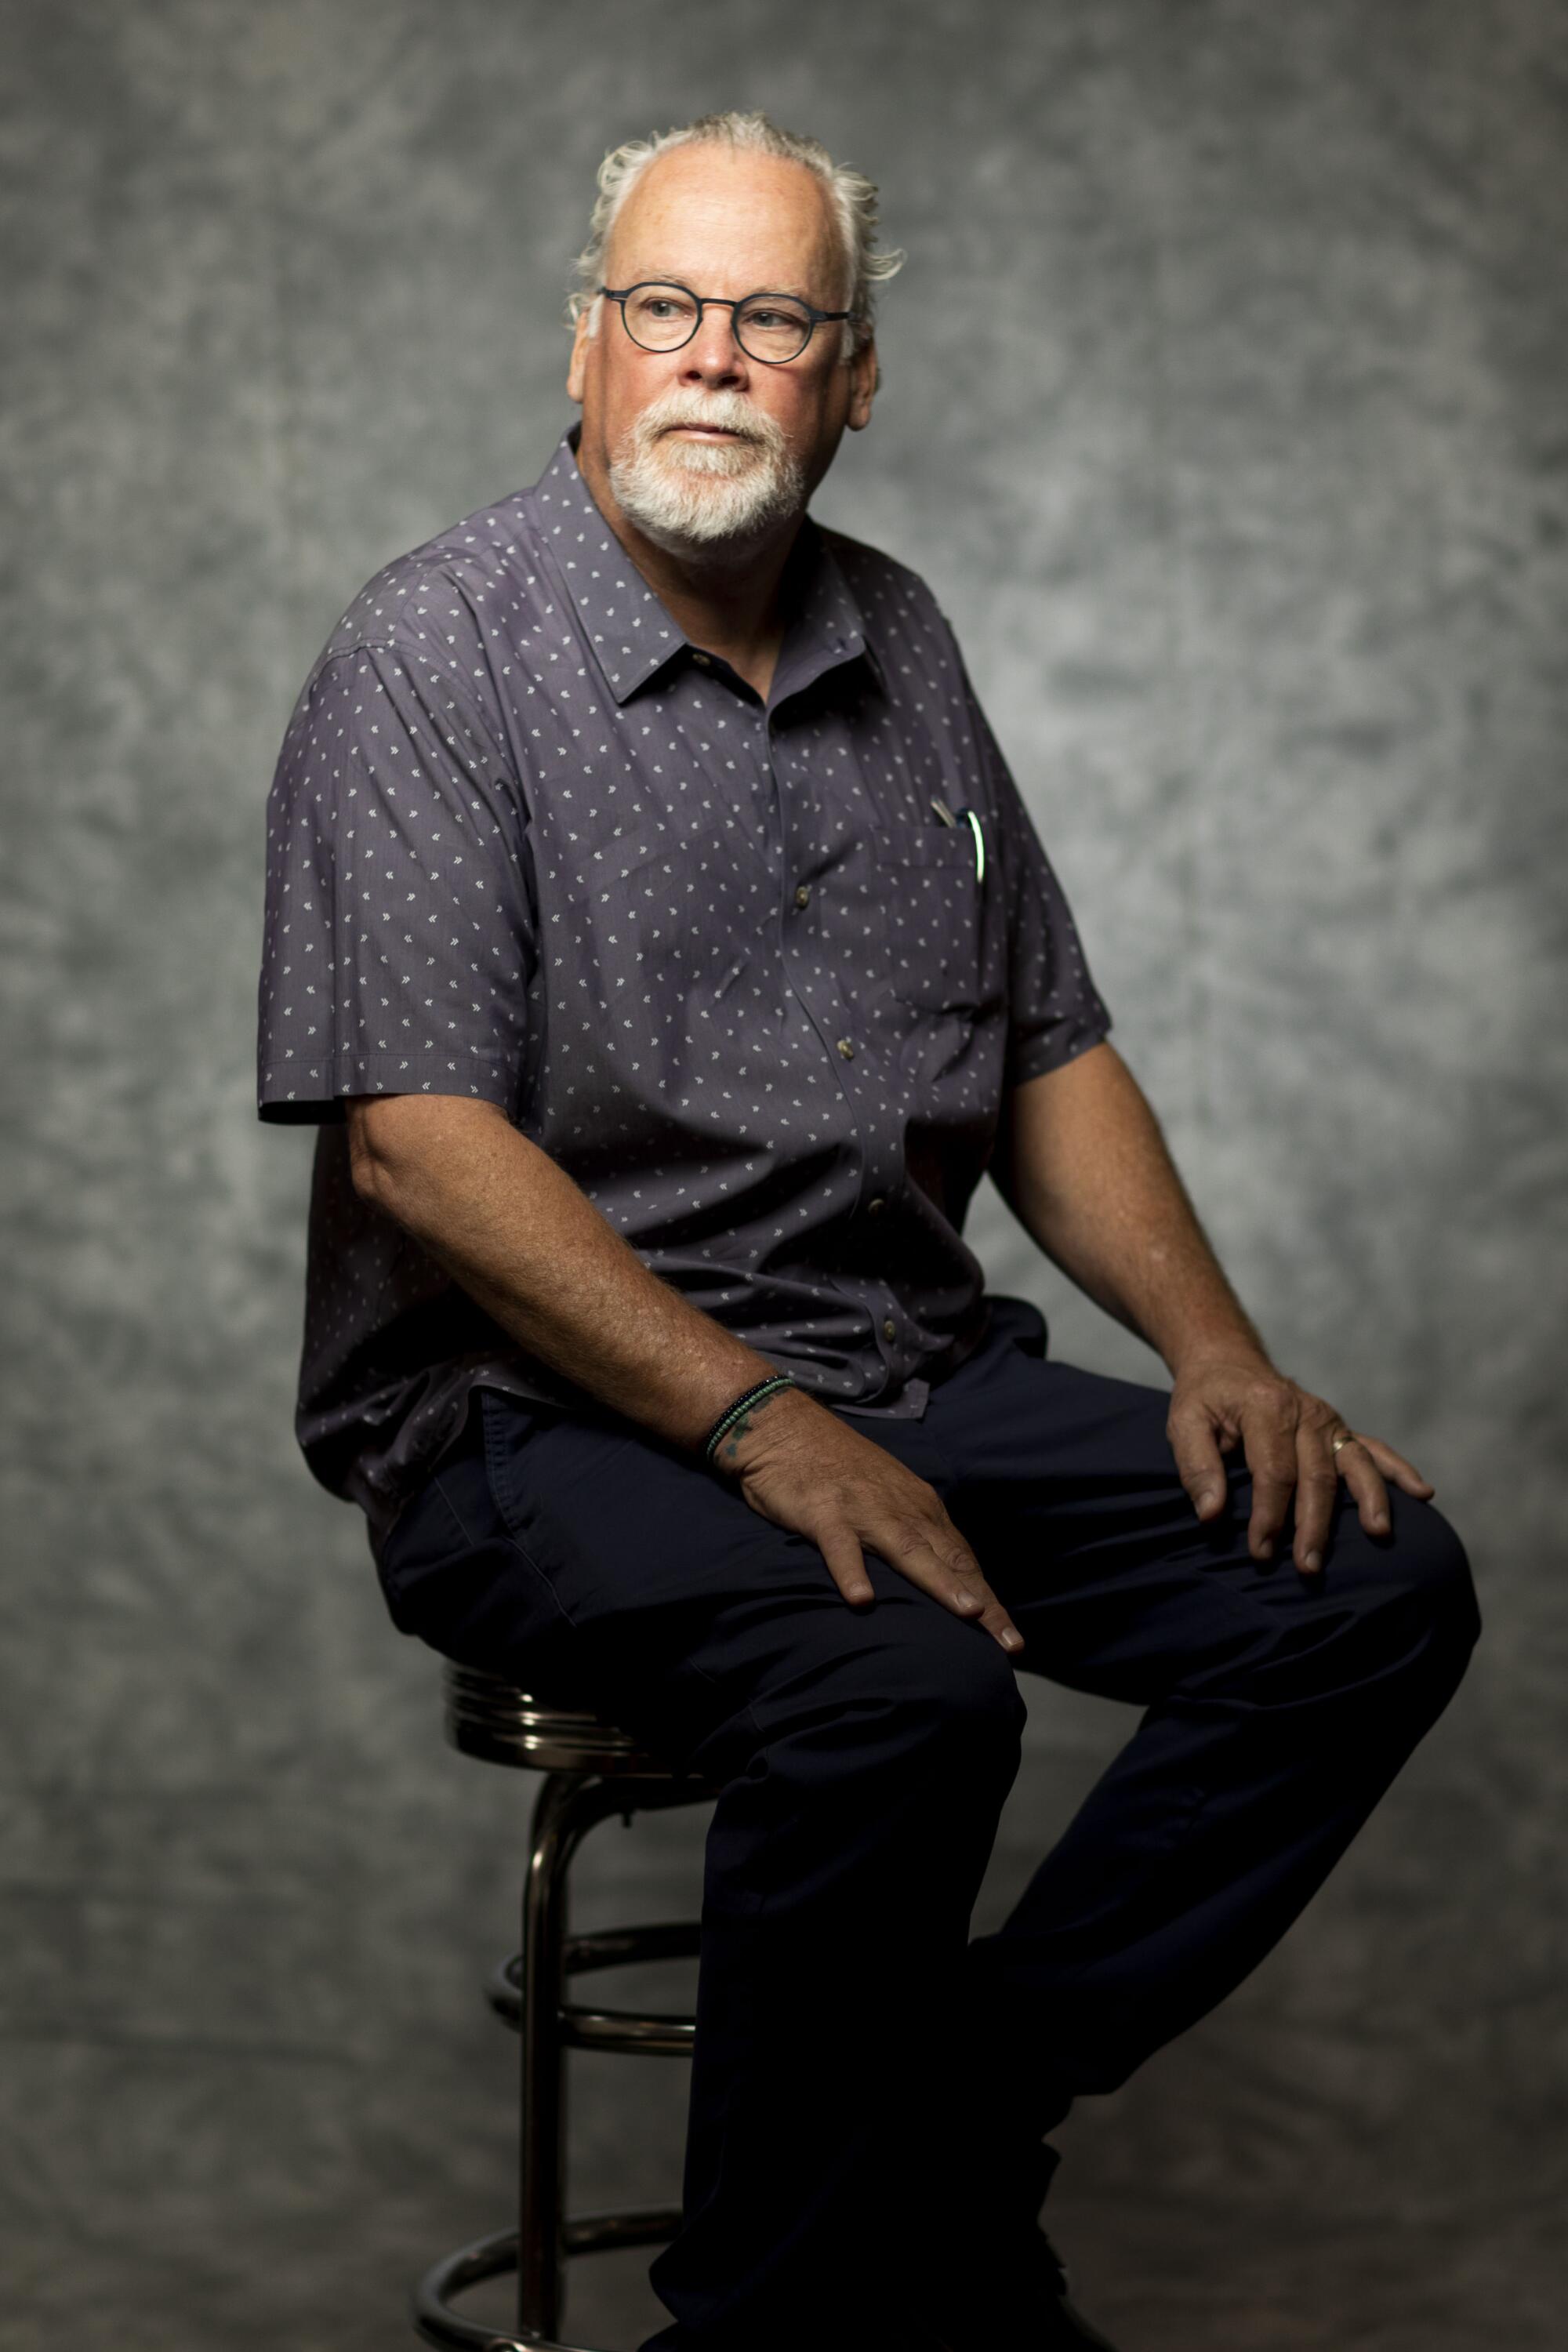 Michael Connelly, author of "Desert Star," at the Los Angeles Times Festival of Books Portrait Studio.